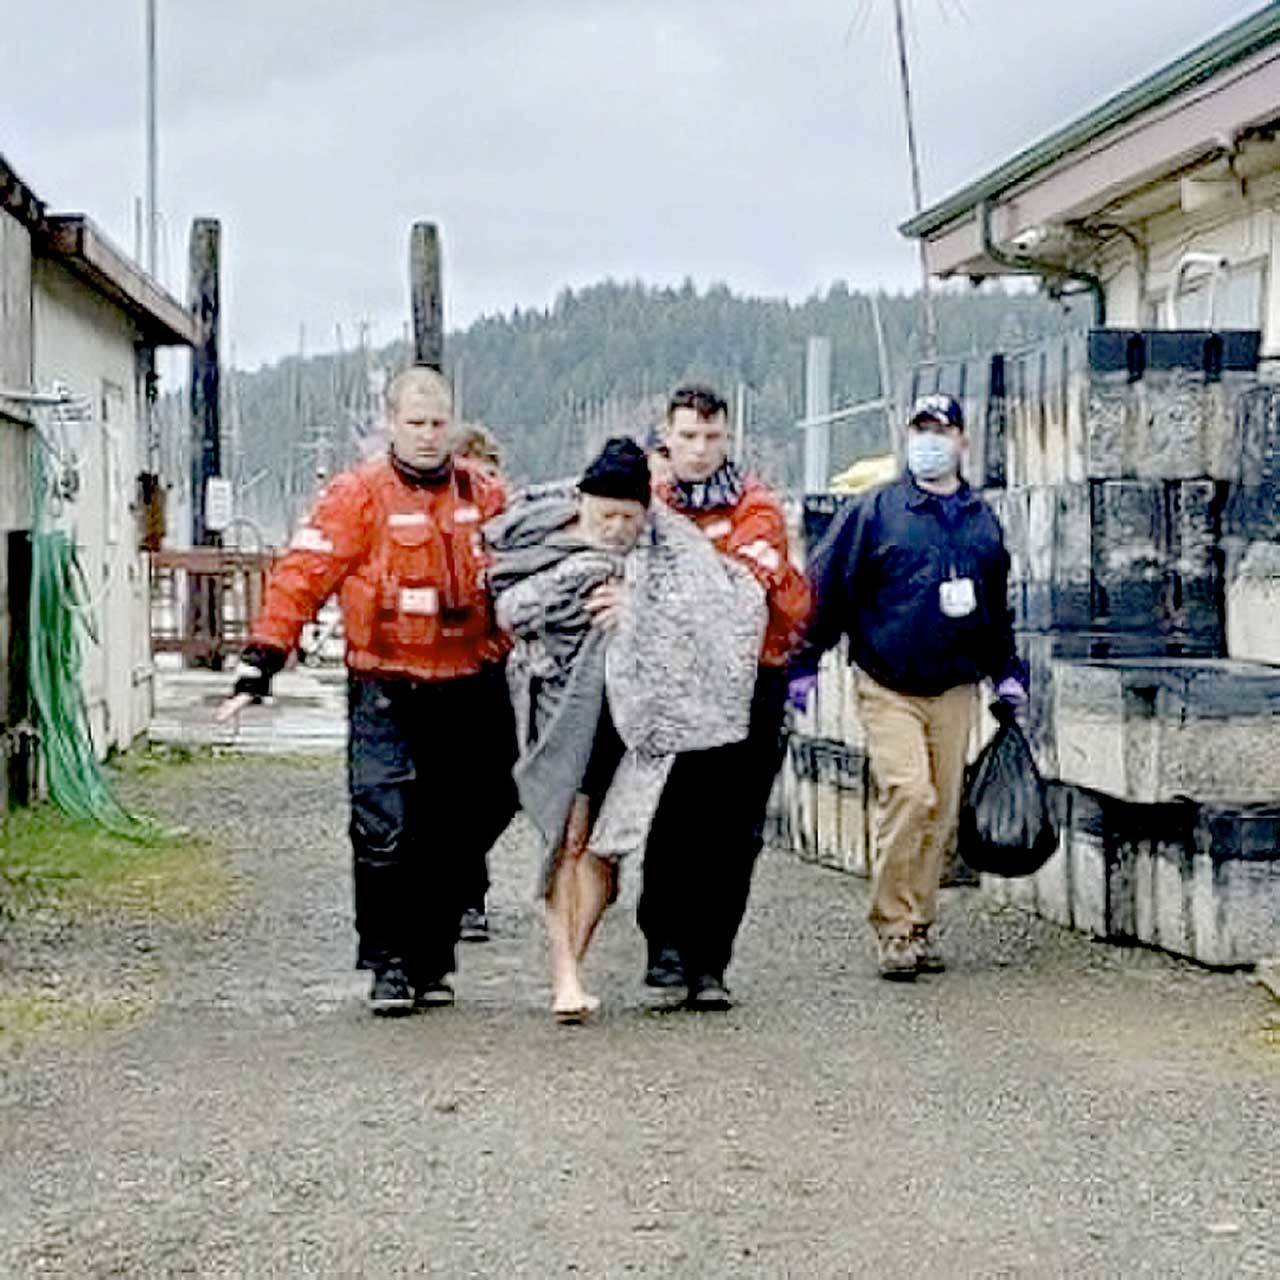 Members from Coast Guard Station Quillayute River help a man to an awaiting ambulance after the vessel he was in sank on Saturday 5 miles off the coast of La Push. None of the three men were wearing lifejackets. (U.S. Coast Guard photo by Station Quillayute River)